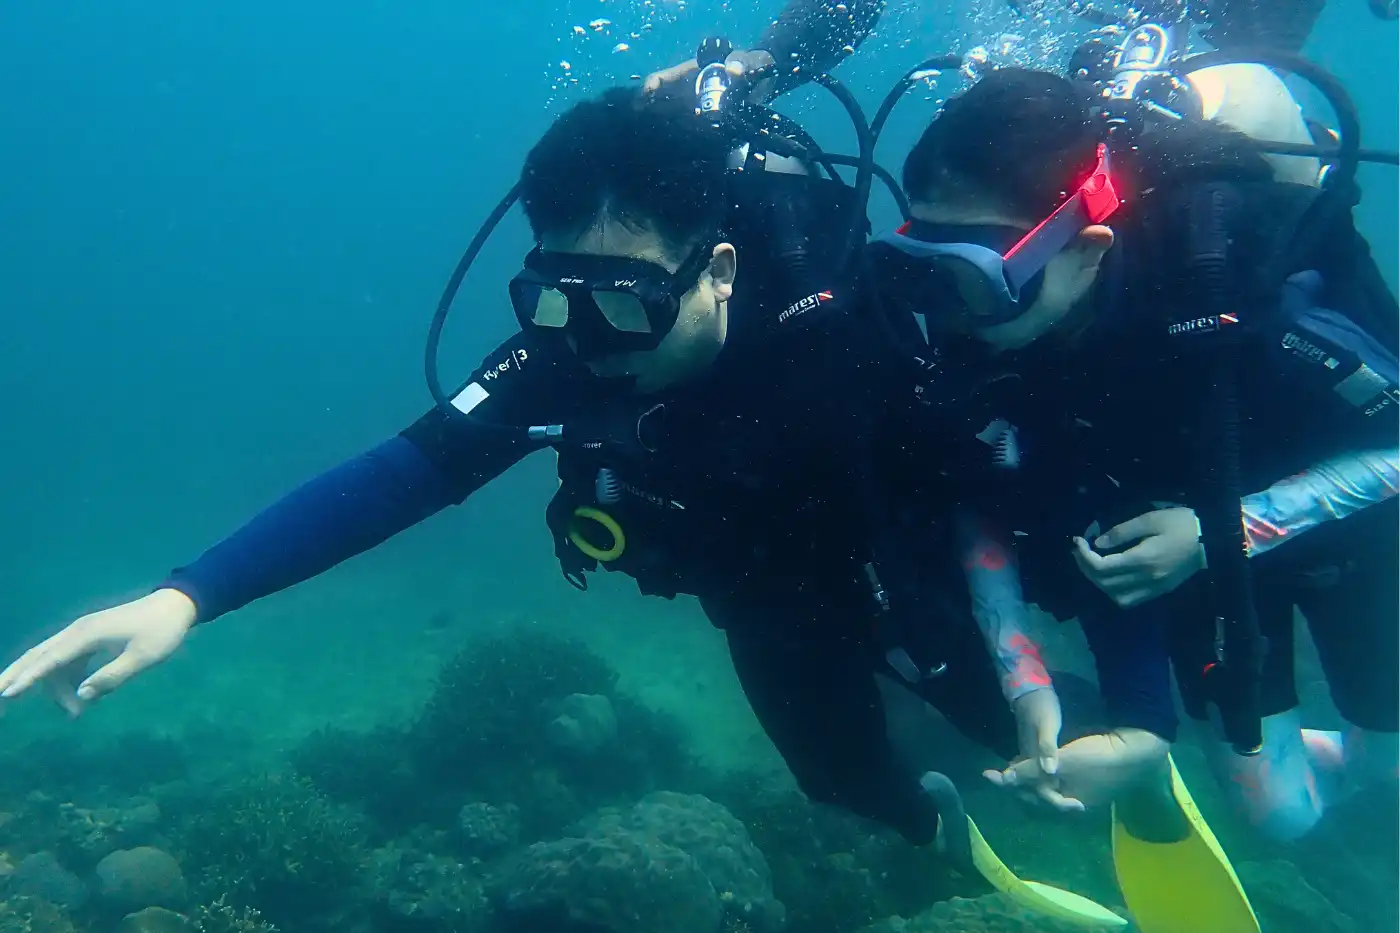 Two scuba divers exploring underwater near Mantanani Island, observing coral reefs.